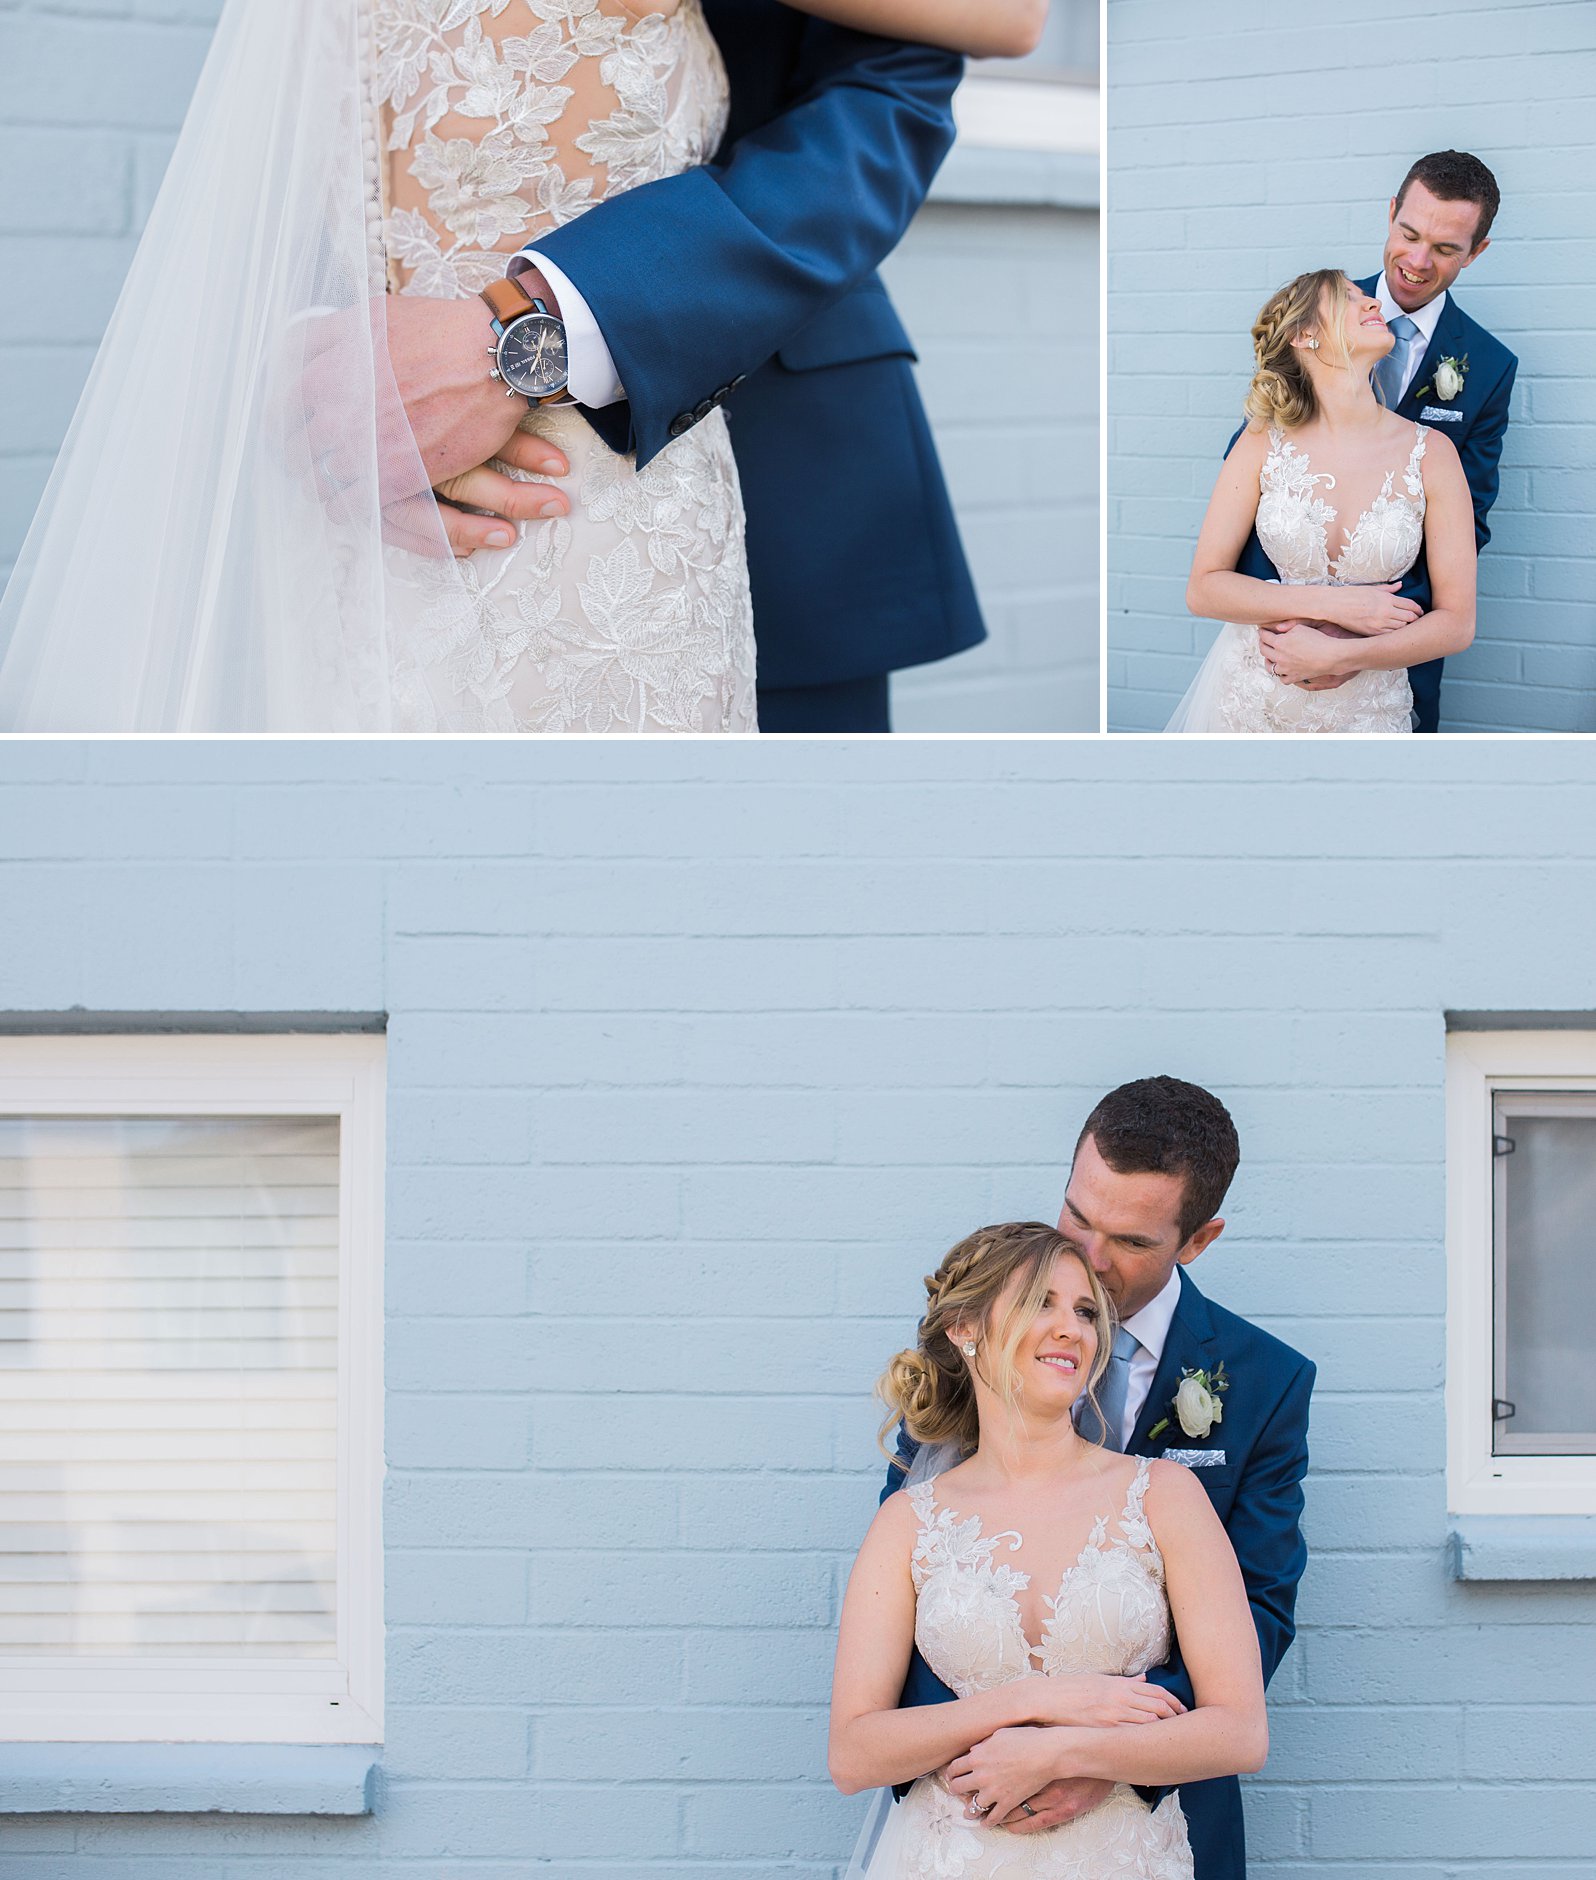 Couple's pictures by L'Auberge Del Mar. Cute blue wall.